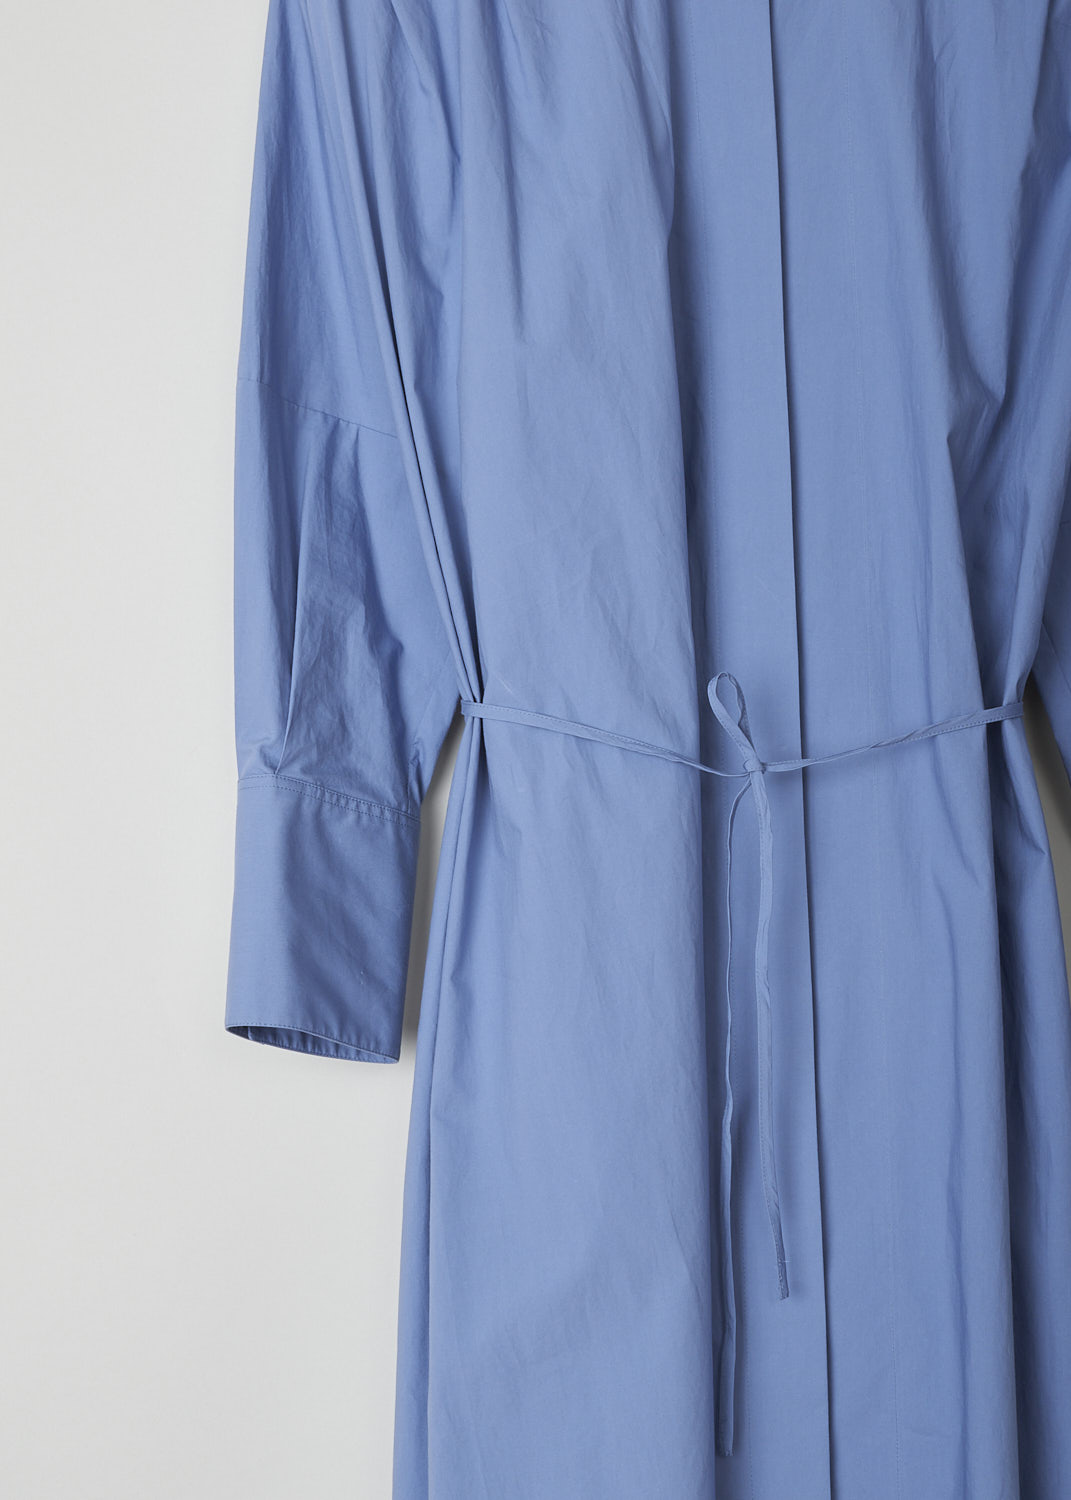 JIL SANDER, BLUE MIDI SHIRT DRESS WITH WAIST TIE, JSPO500806_WO242000_450, Blue, Detail, This blue midi shirt dress has a spread collar with a straight neckline. The dress has a concealed front button closure with a single black button visible. The dress has three quarter sleeves with buttoned cuffs. The A-line silhouette can be cinched in with ties. Slanted pockets are concealed in the side seams. The dress has an asymmetrical finish, meaning the back is longer than the front.
